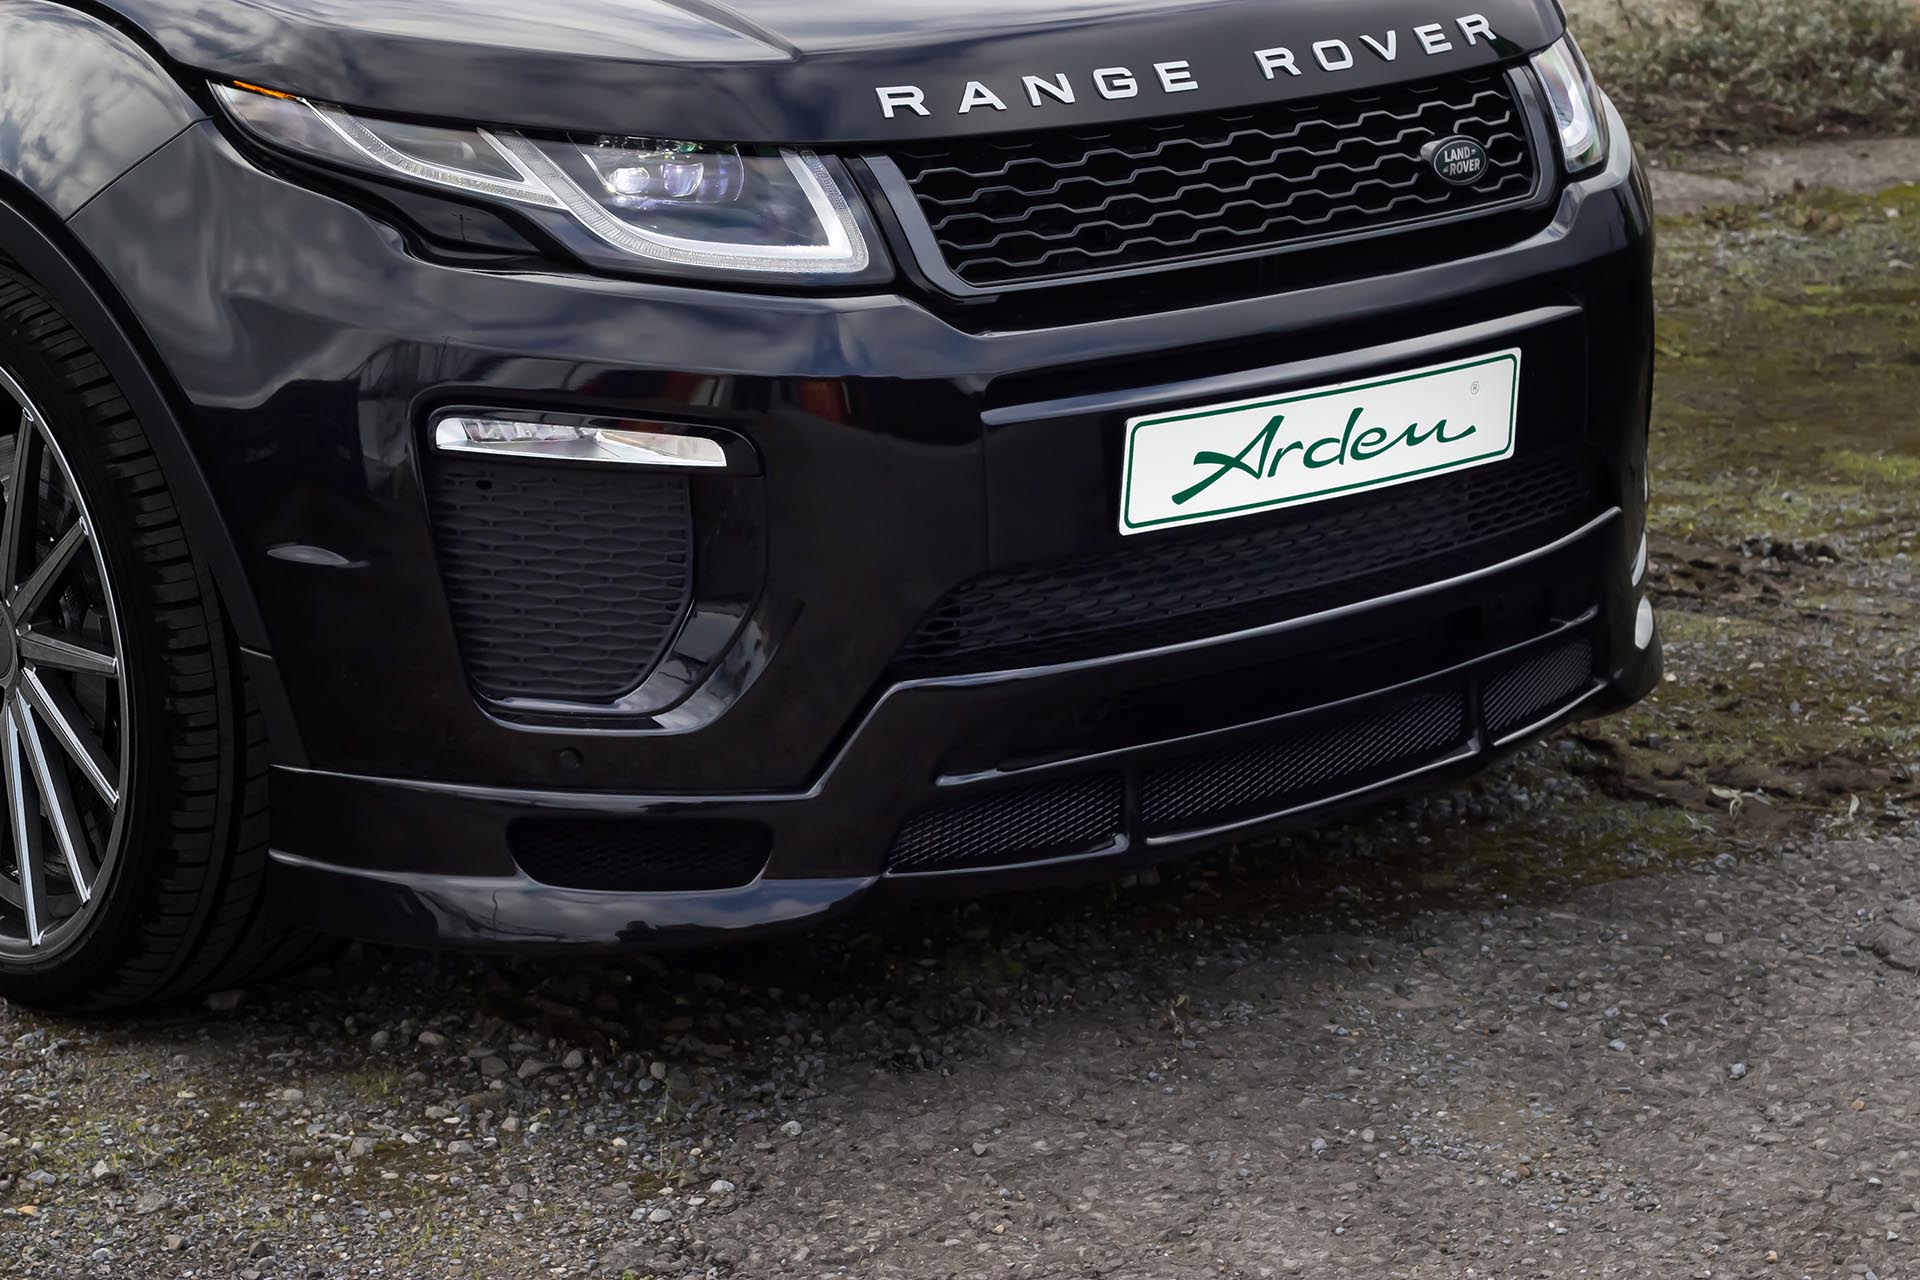 Range Rover Evoque by Arden Daily Tuning